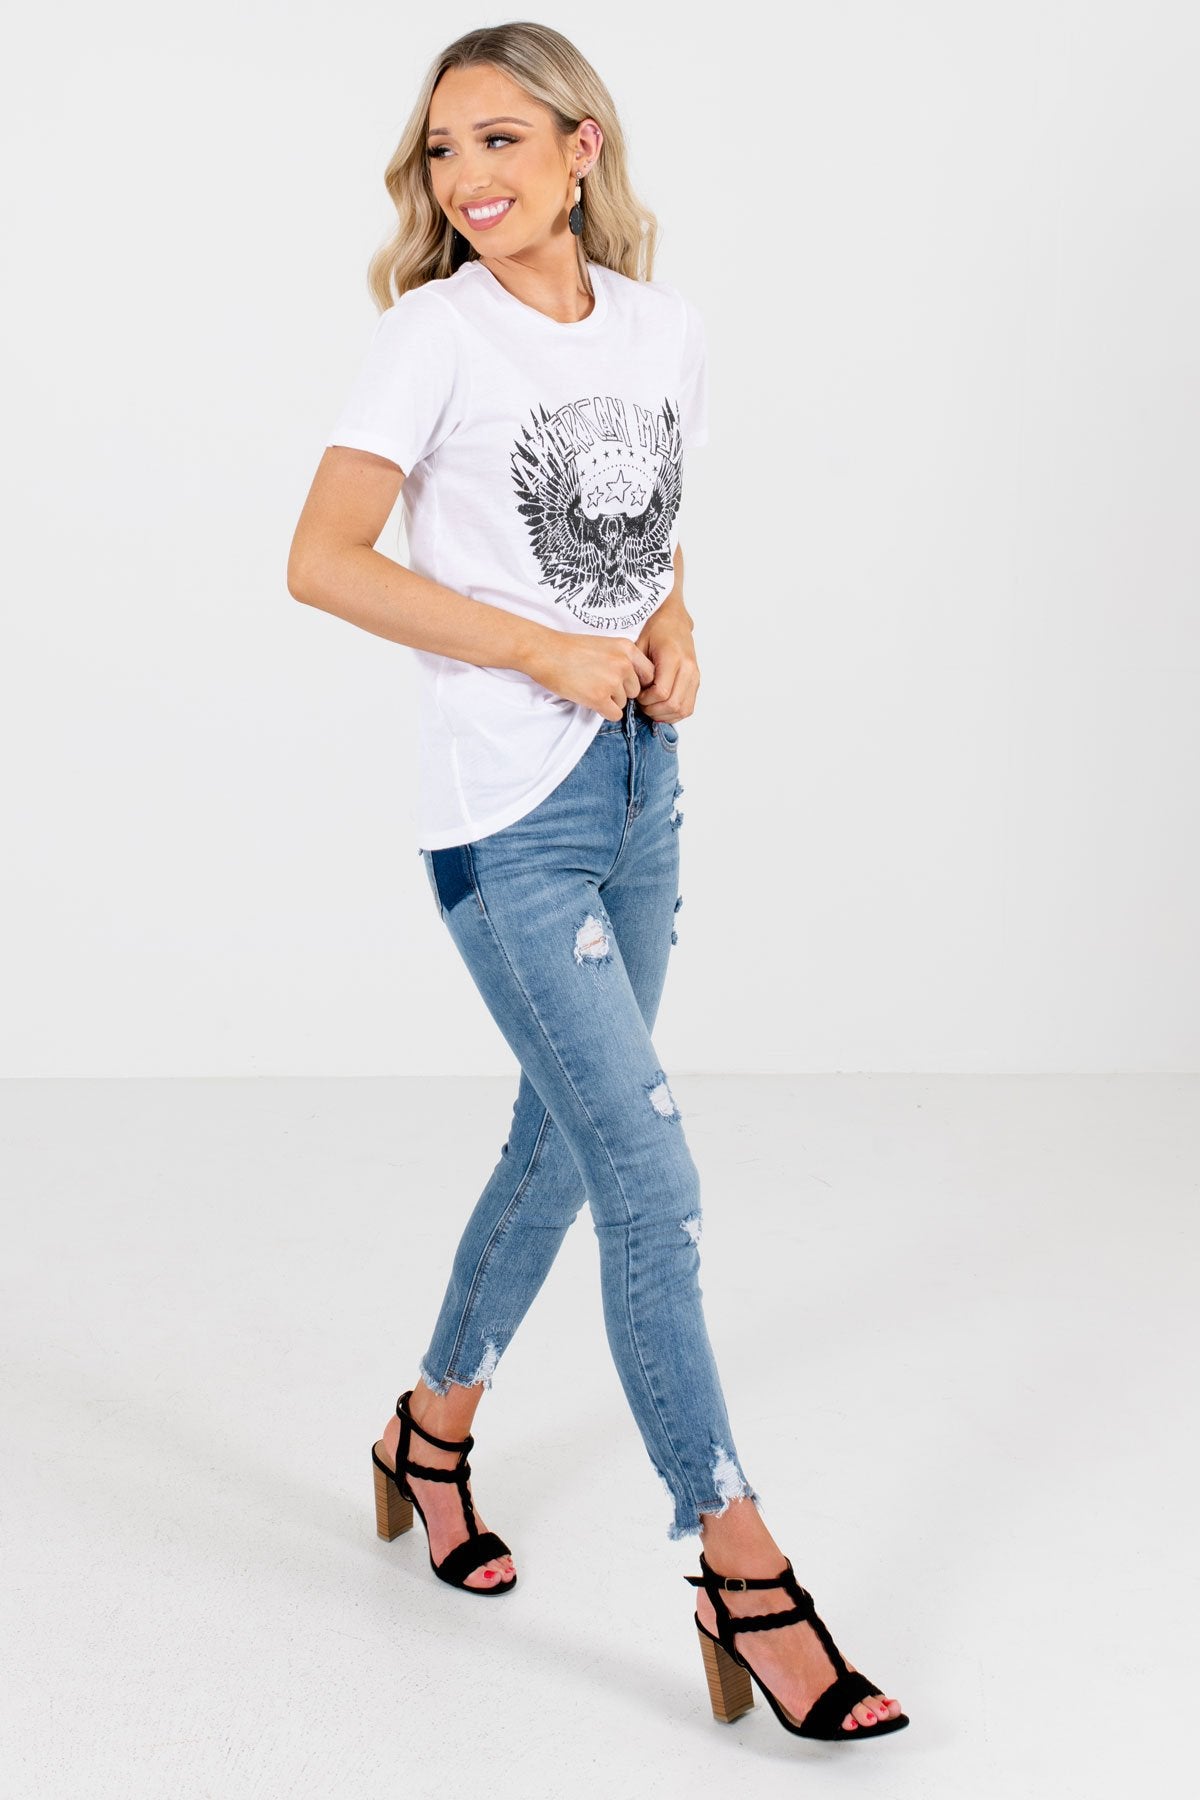 White Cute and Comfortable Boutique Graphic Tees for Women